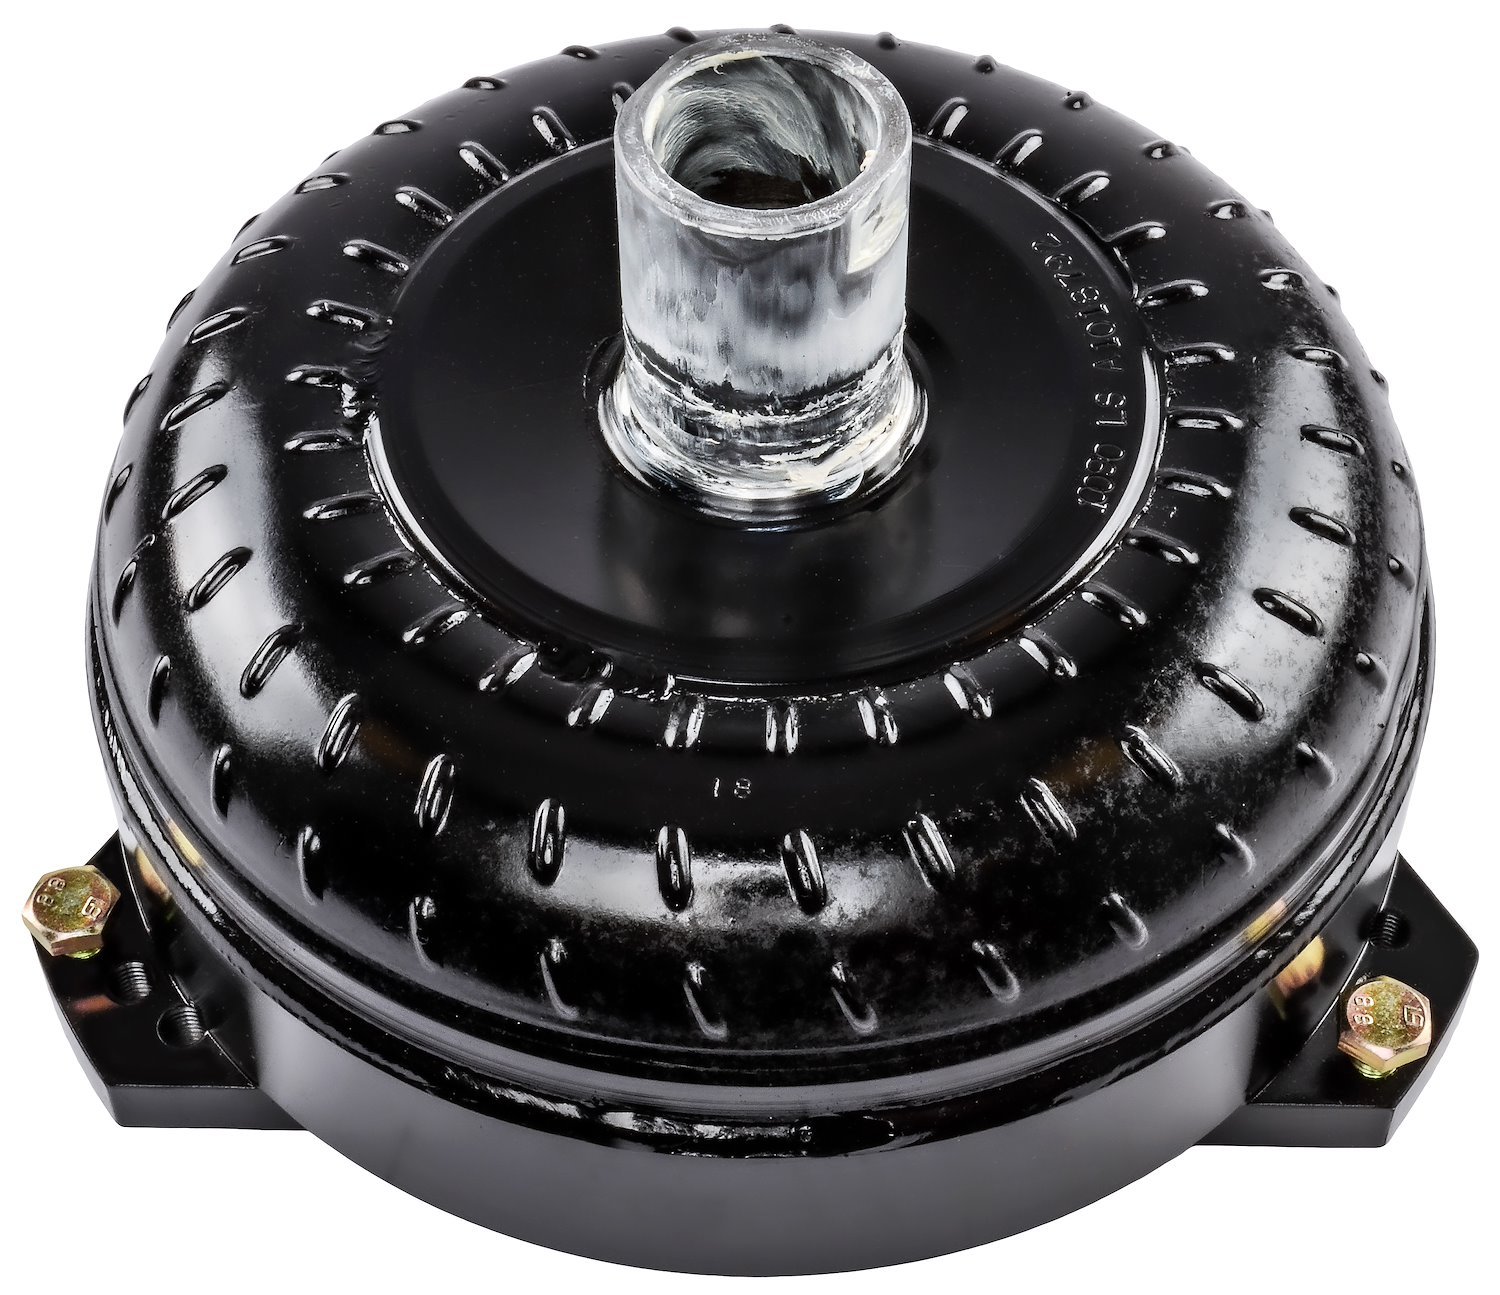 Billet Torque Converter for GM 4L80E/4L85E Mounted to an LS Series Engine [2900-3200 RPM Stall Speed]